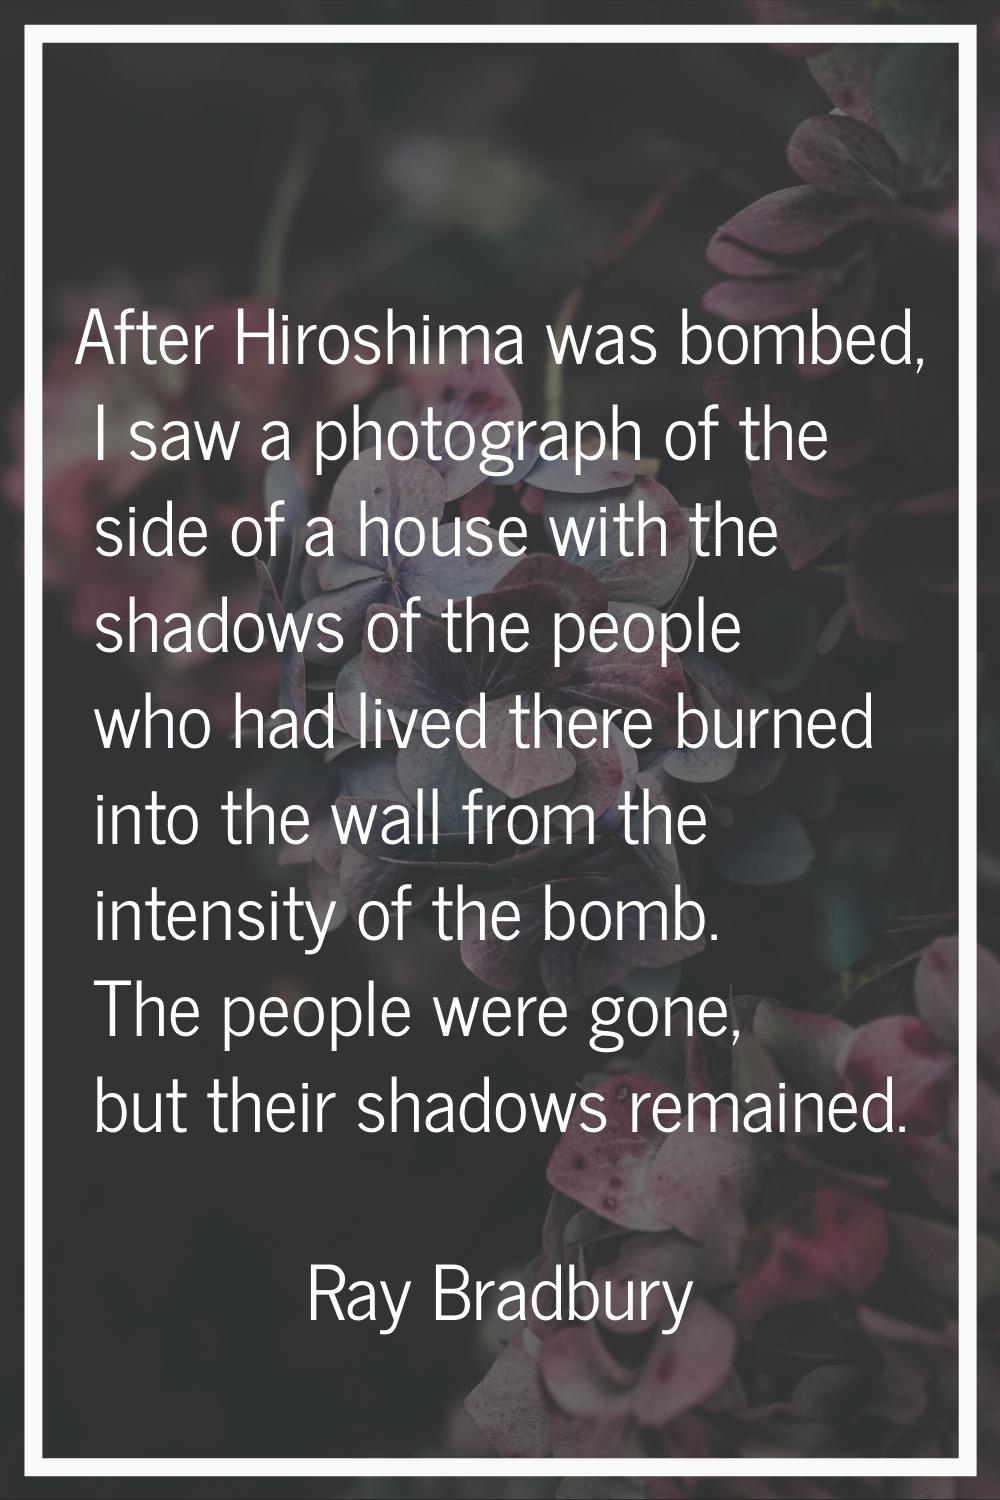 After Hiroshima was bombed, I saw a photograph of the side of a house with the shadows of the peopl